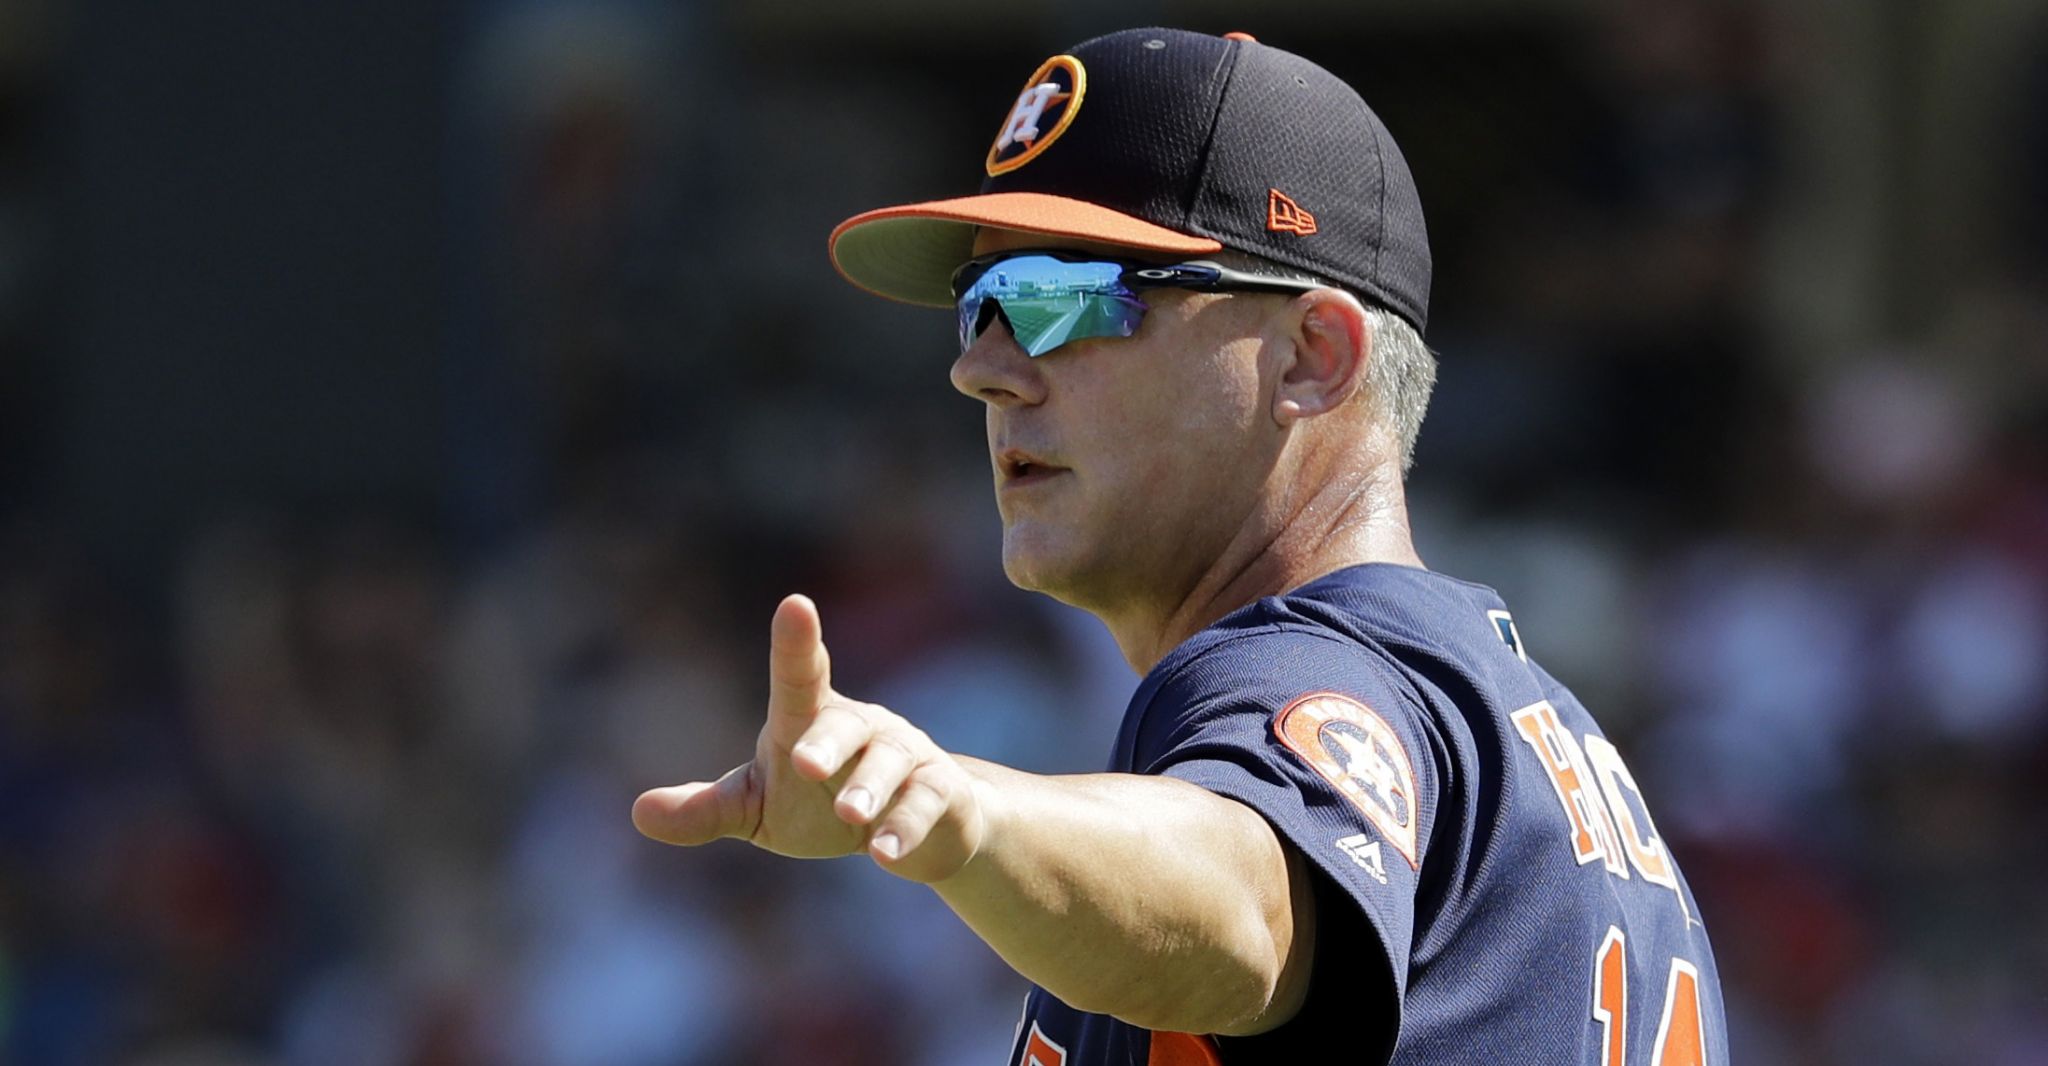 Astros manager A.J. Hinch gets ejected in 1st inning of spring training game - Houston ...